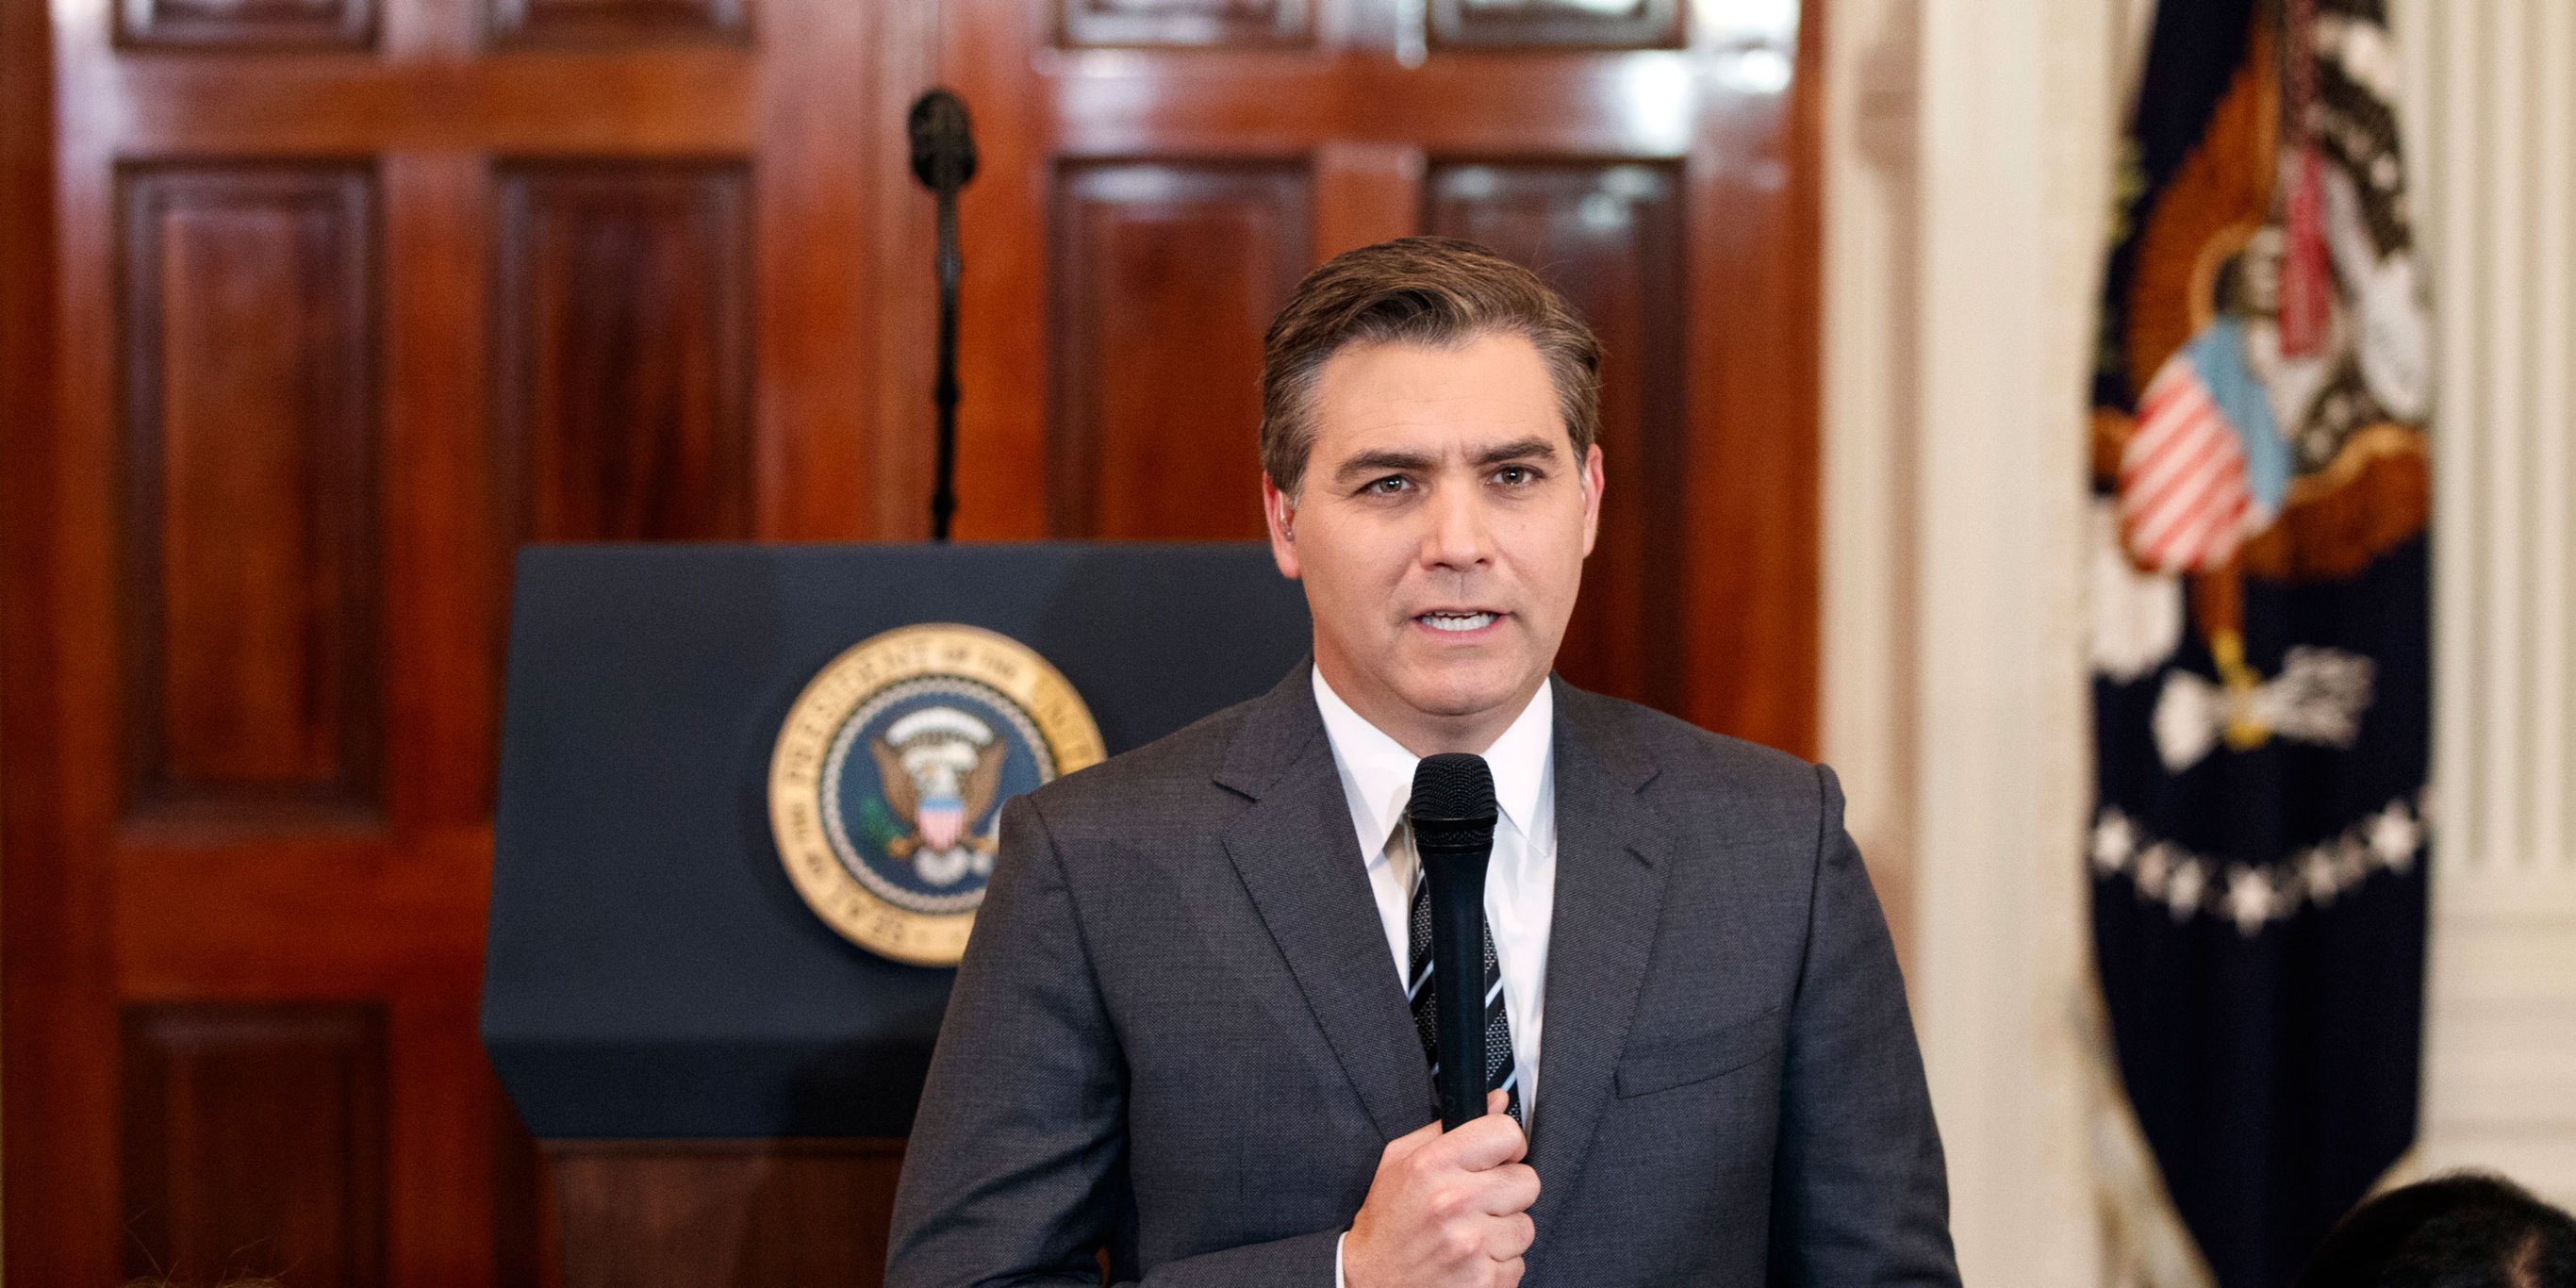 Fox News announces it’s supporting CNN’s lawsuit against the Trump administration for revoking Jim Acosta’s press pass